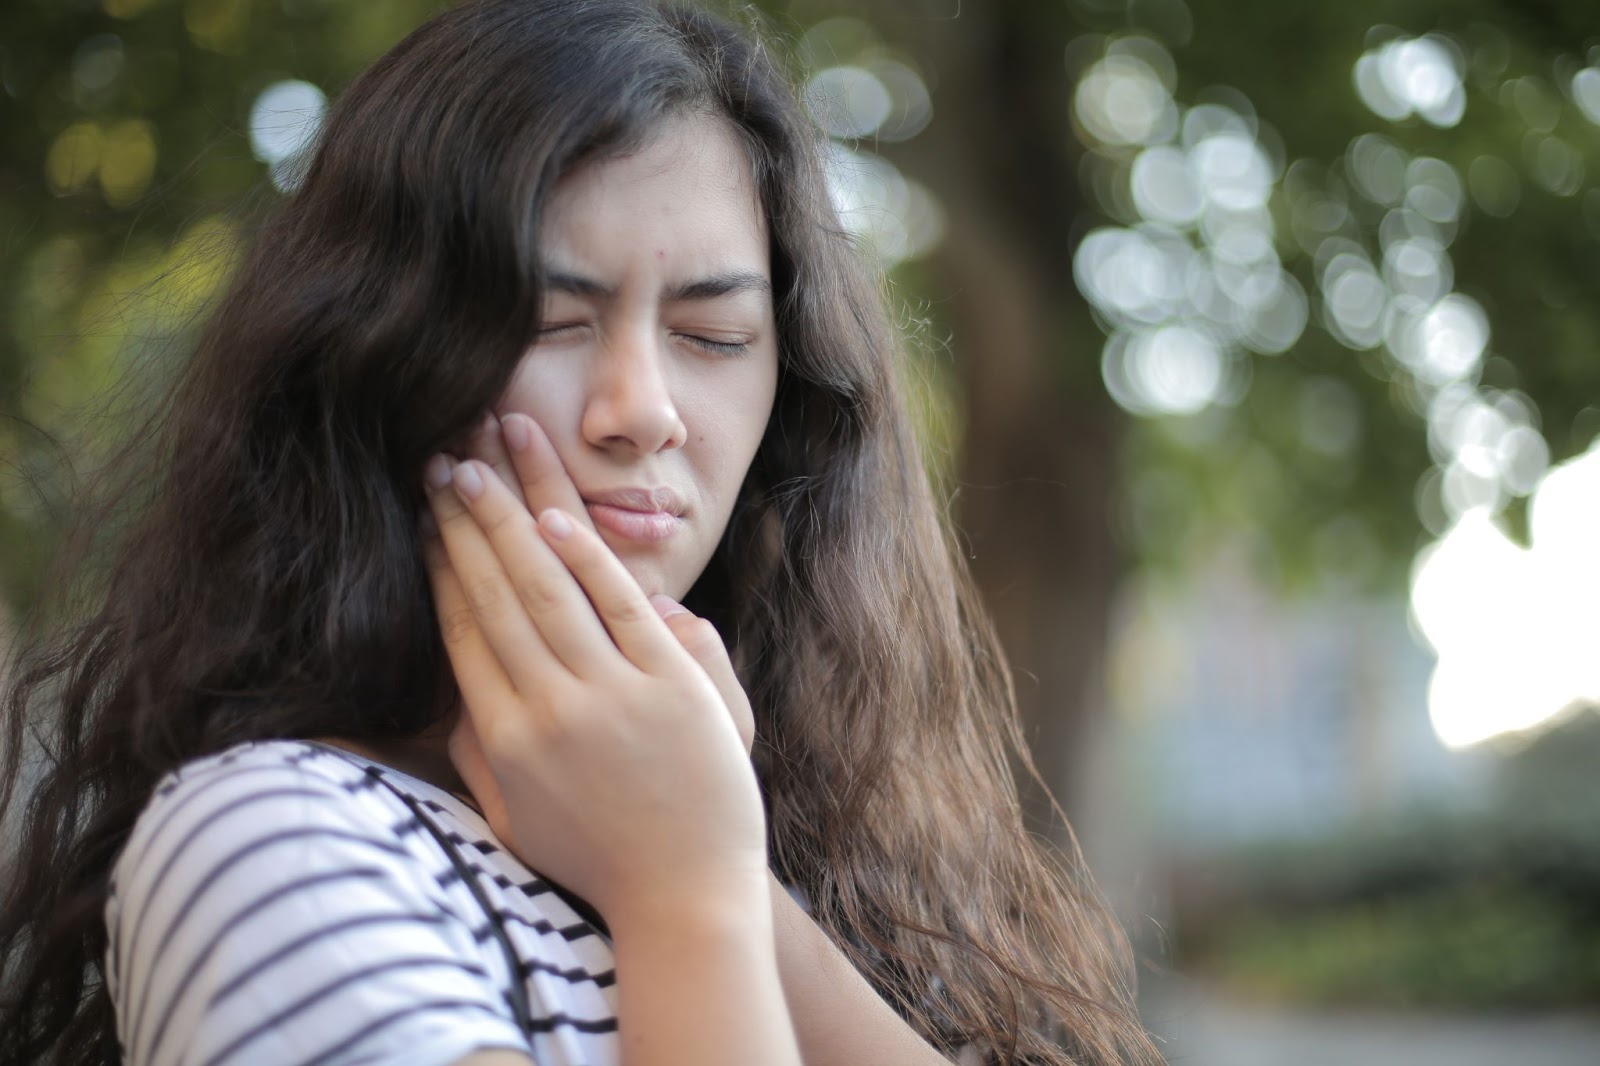 Toothaches: Treatment, Home Remedies, and Causes